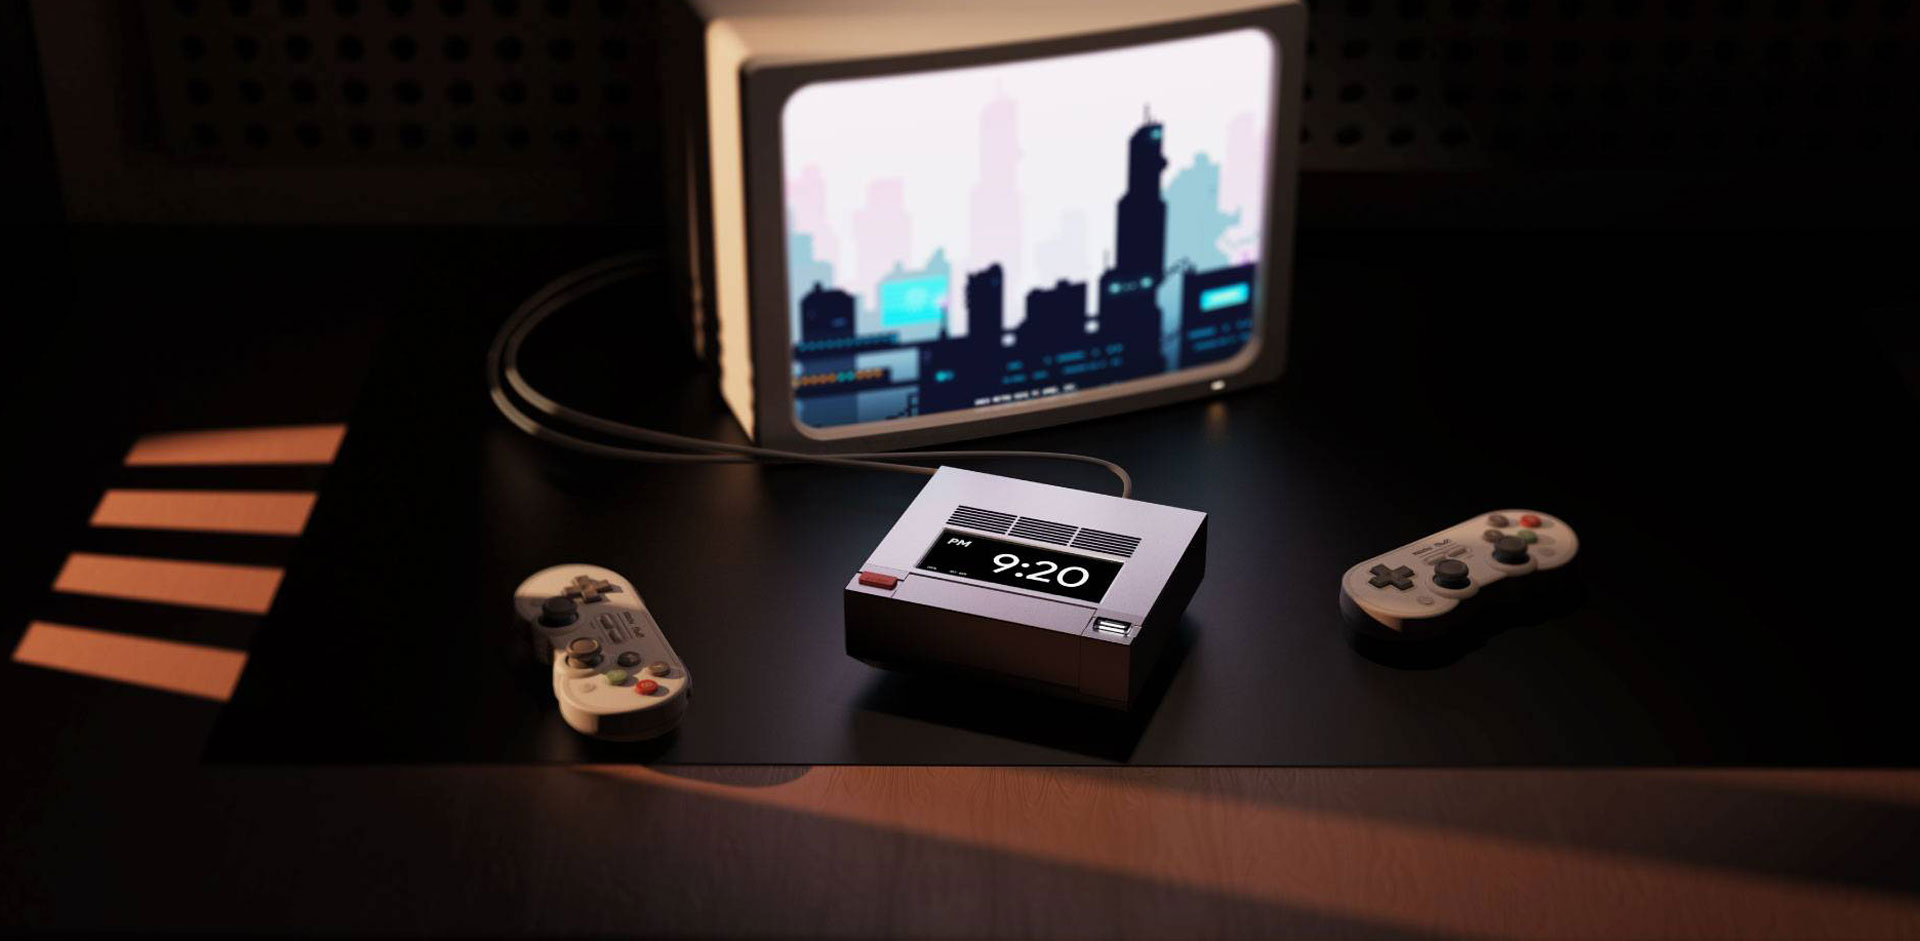 AYANEO’s New NES-Style Mini PC: Pretty, and Pretty Powerful